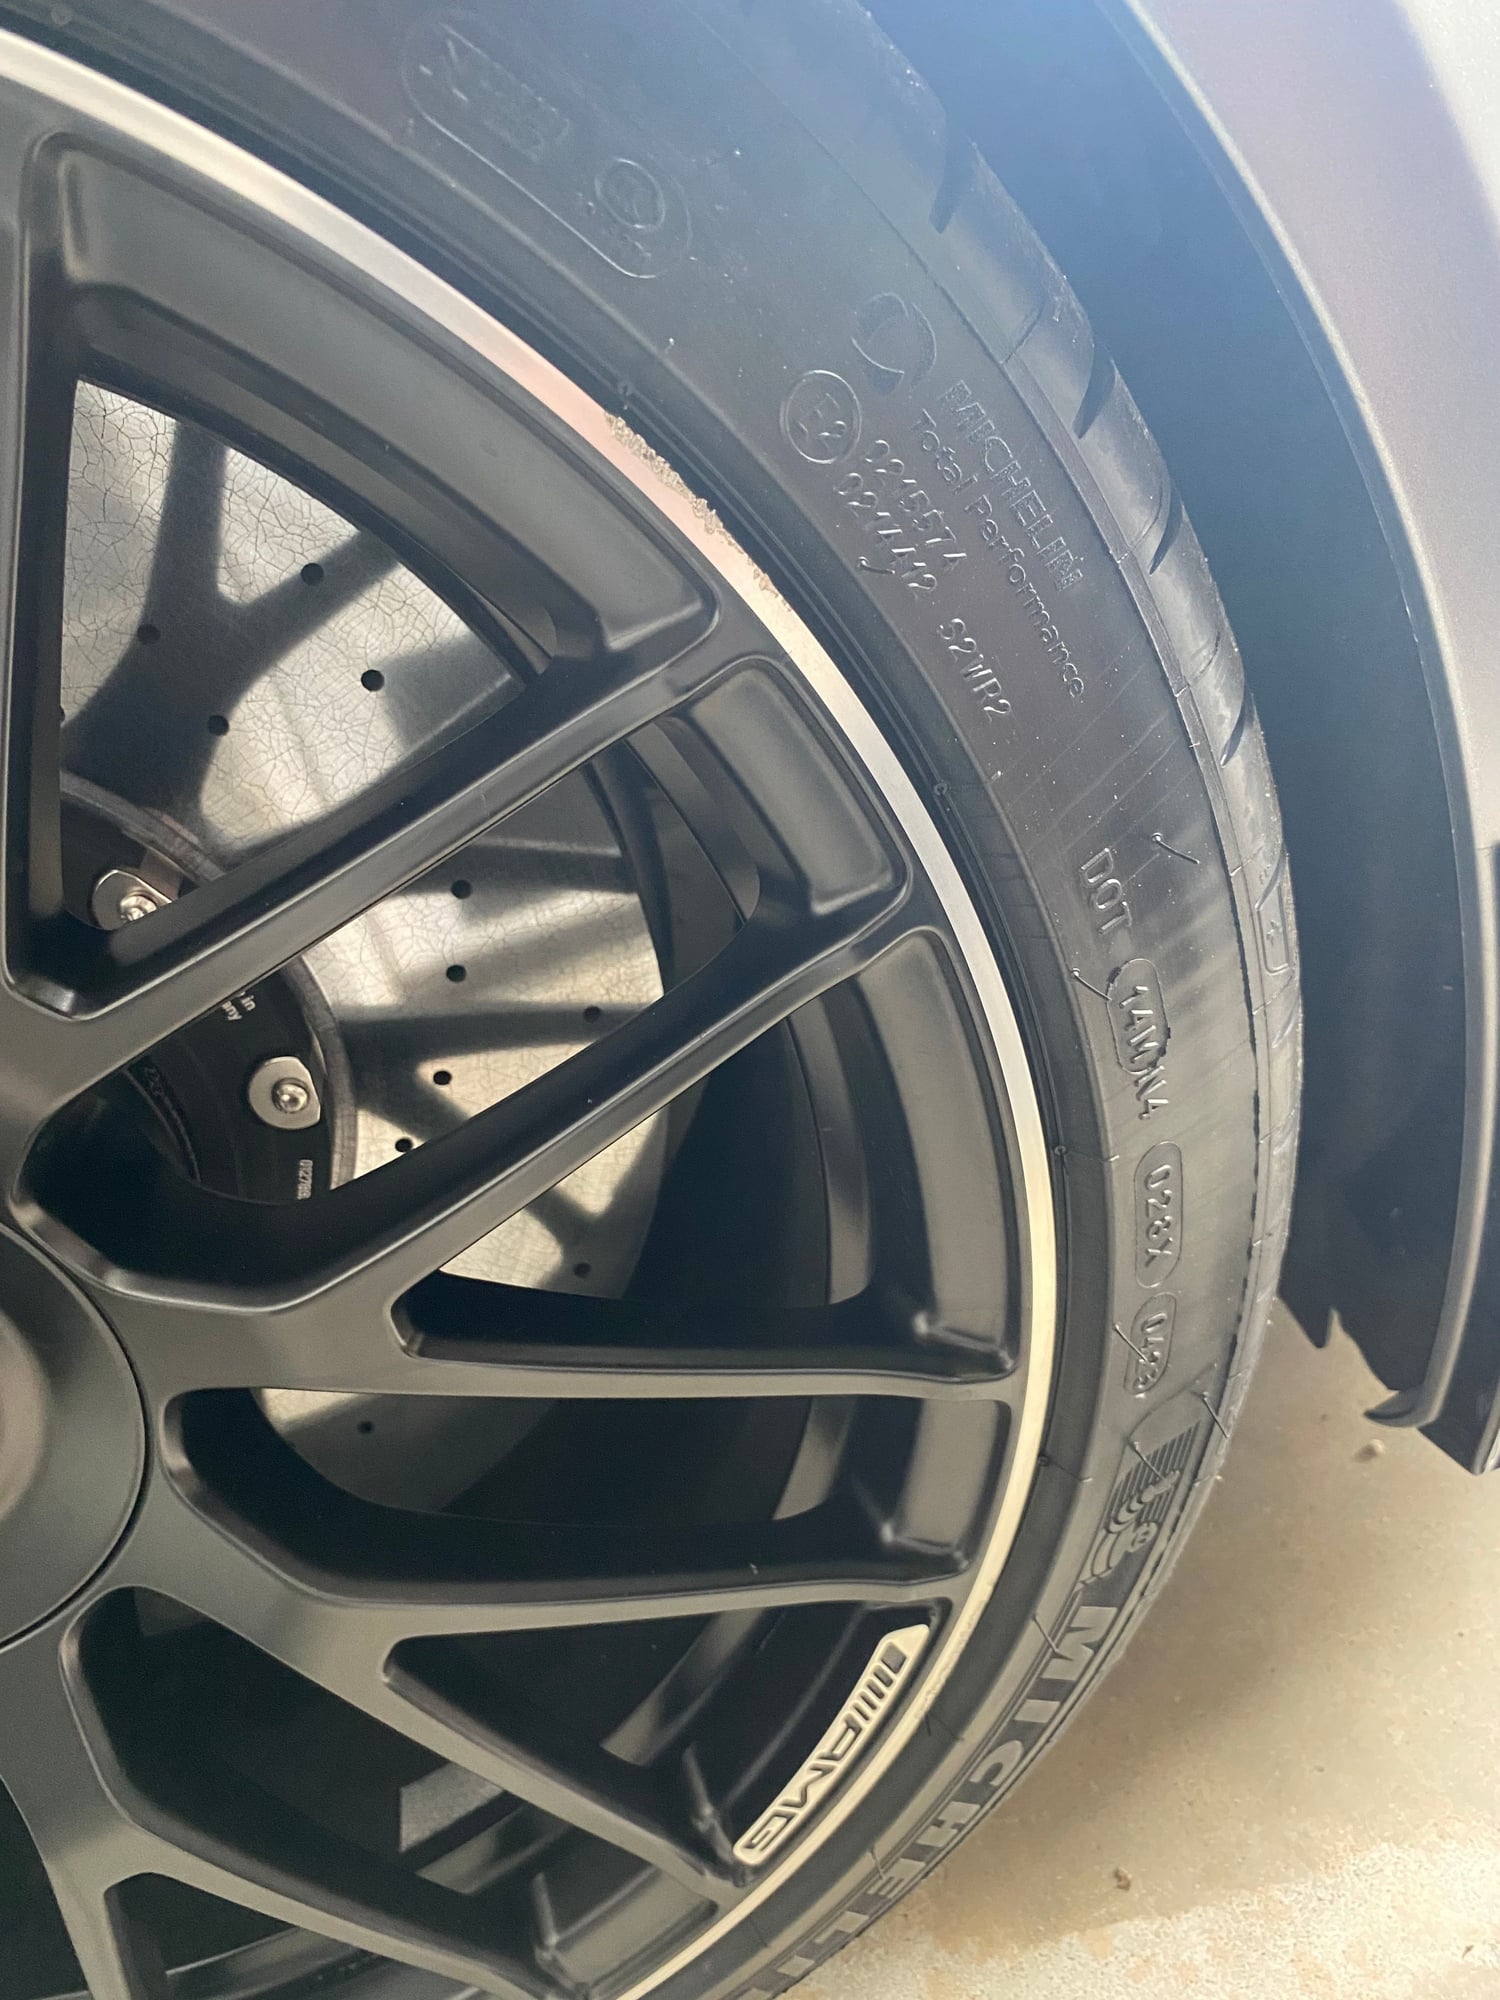 Wheels and Tires/Axles - 2019 C63s Coupe AMG cross spoke black 19/20 wheels - Used - 2019 to 2023 Mercedes-Benz C63 AMG S - Virginia Beach, VA 23456, United States